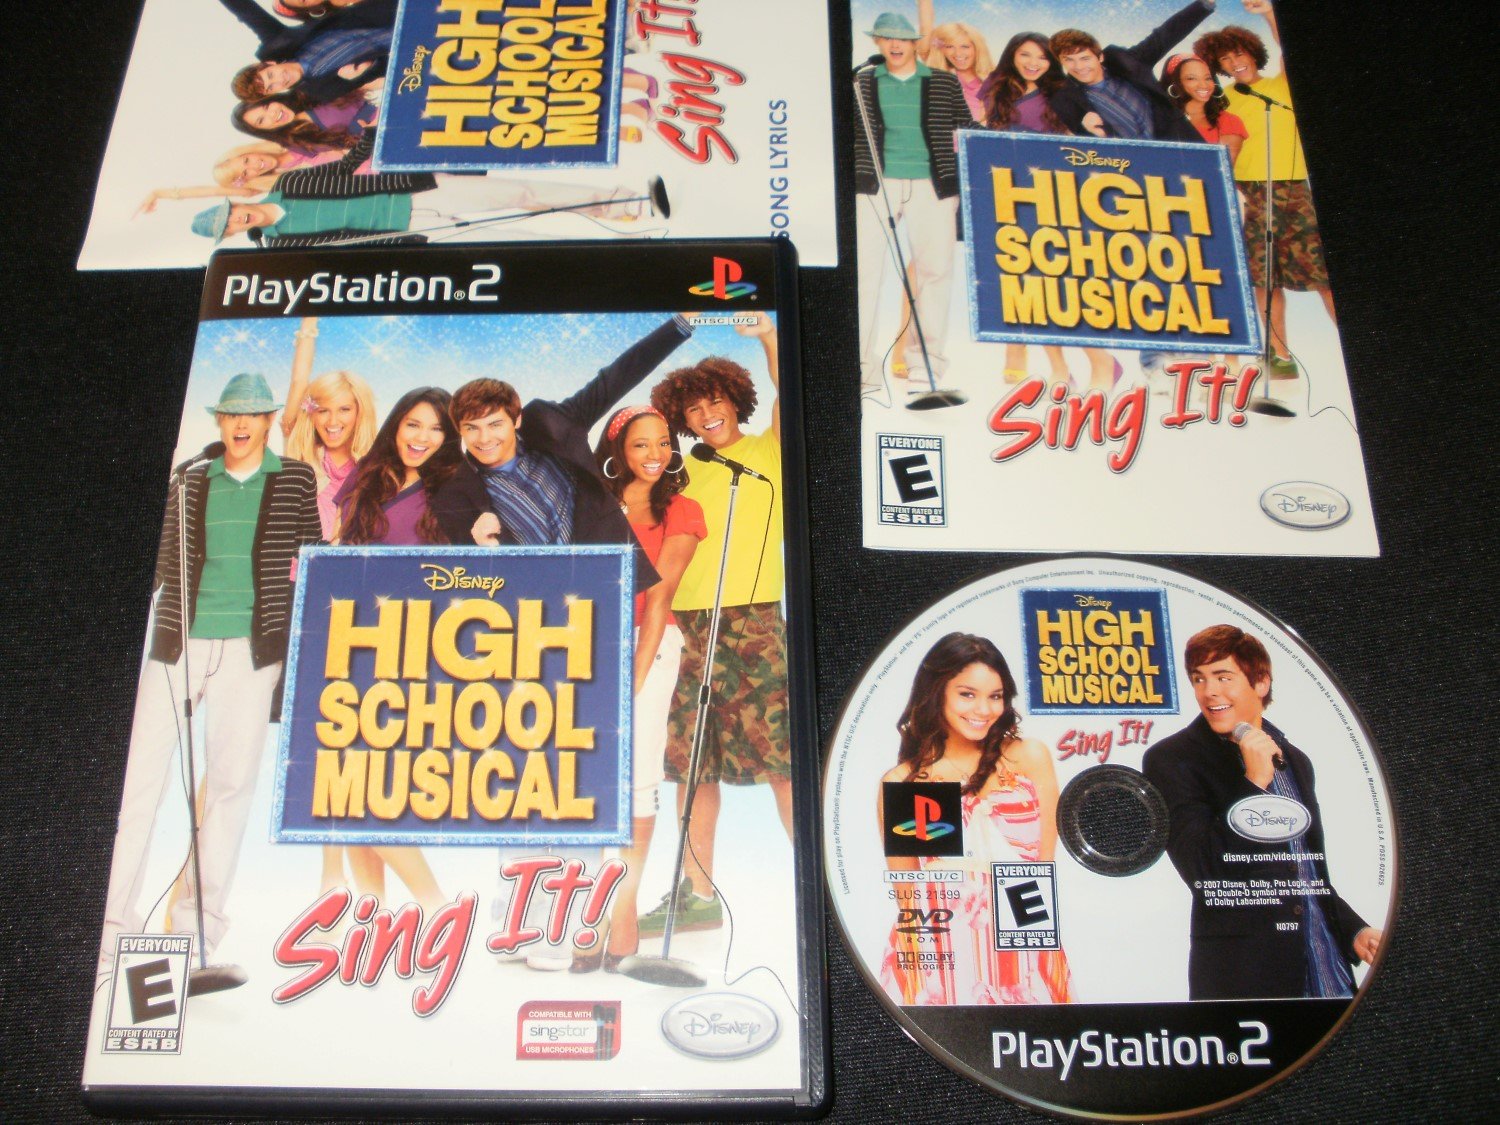 High School Musical Sing It - Sony PS2 - Complete CIB